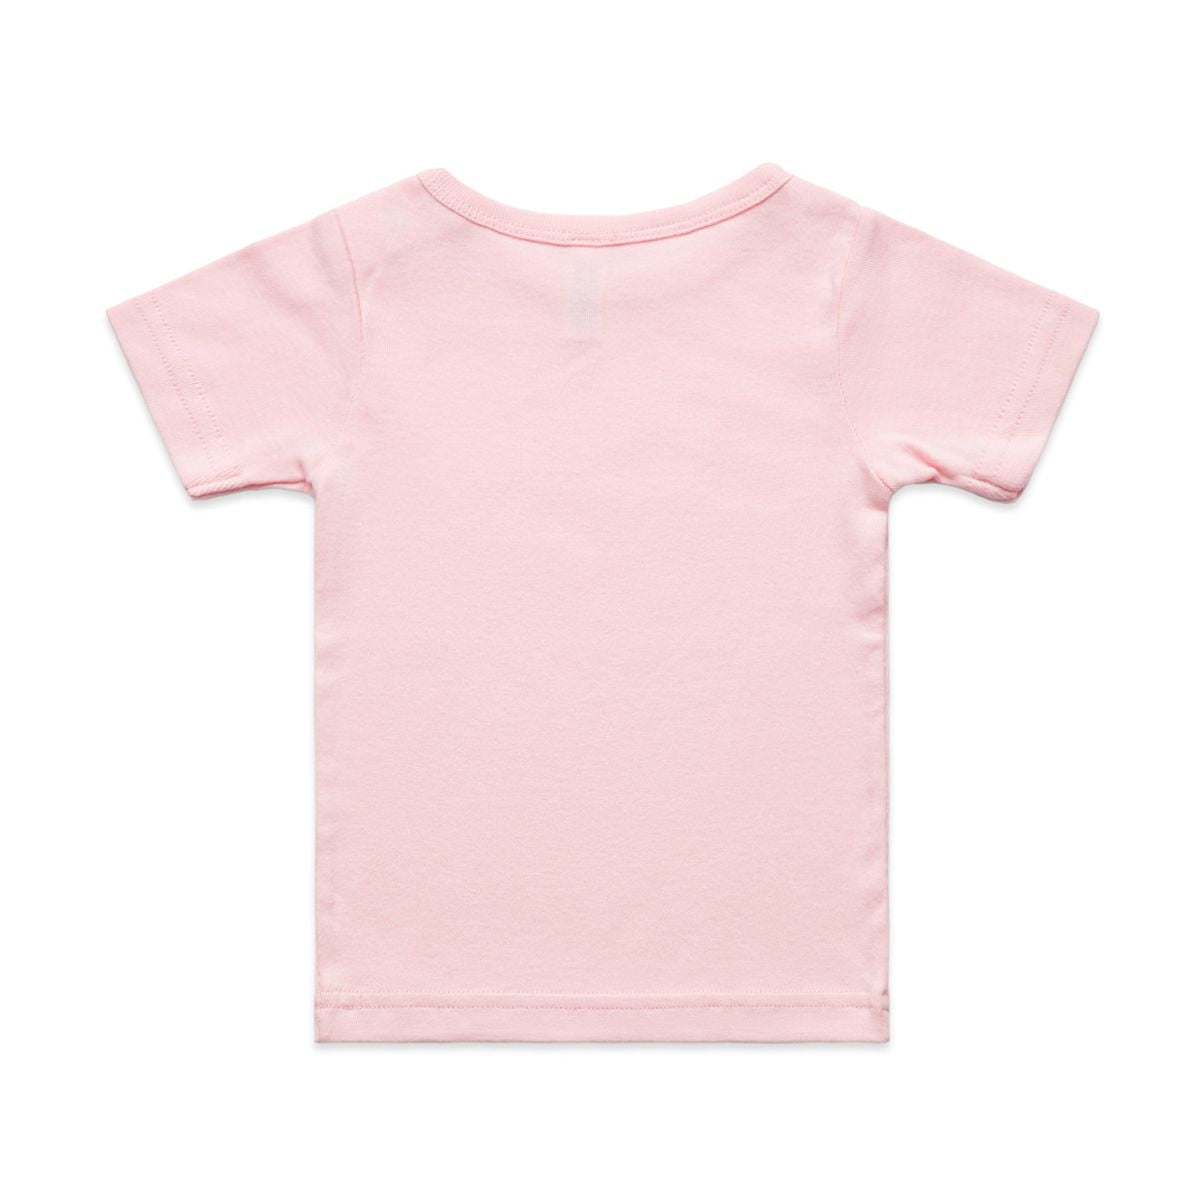 ascolour Infant Wee Tee 3001